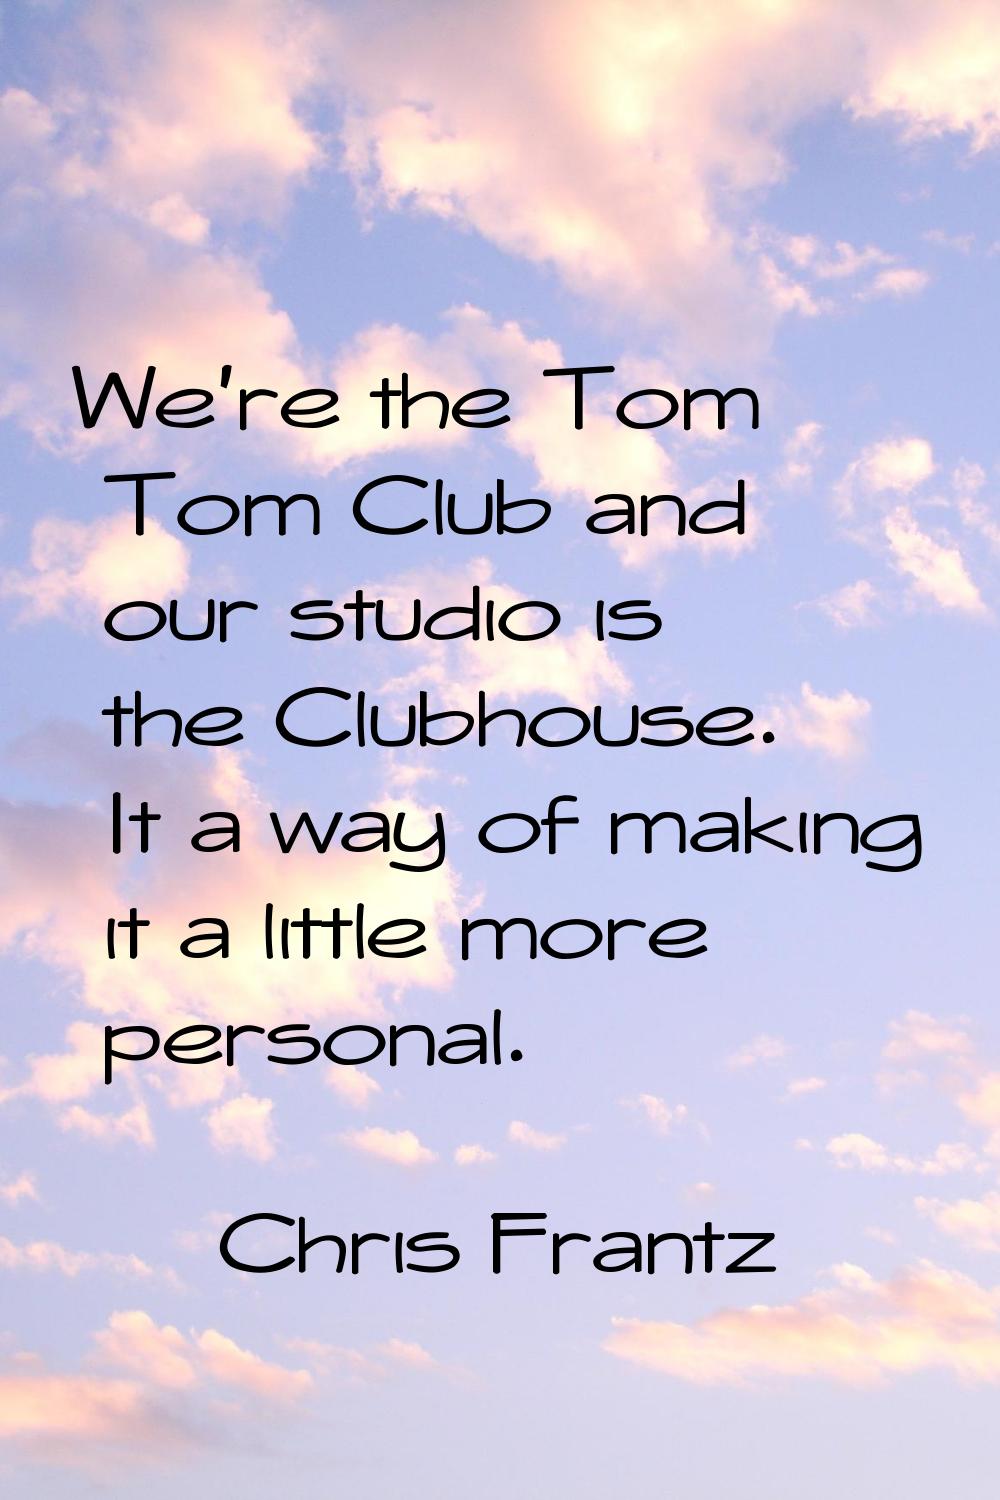 We're the Tom Tom Club and our studio is the Clubhouse. It a way of making it a little more persona